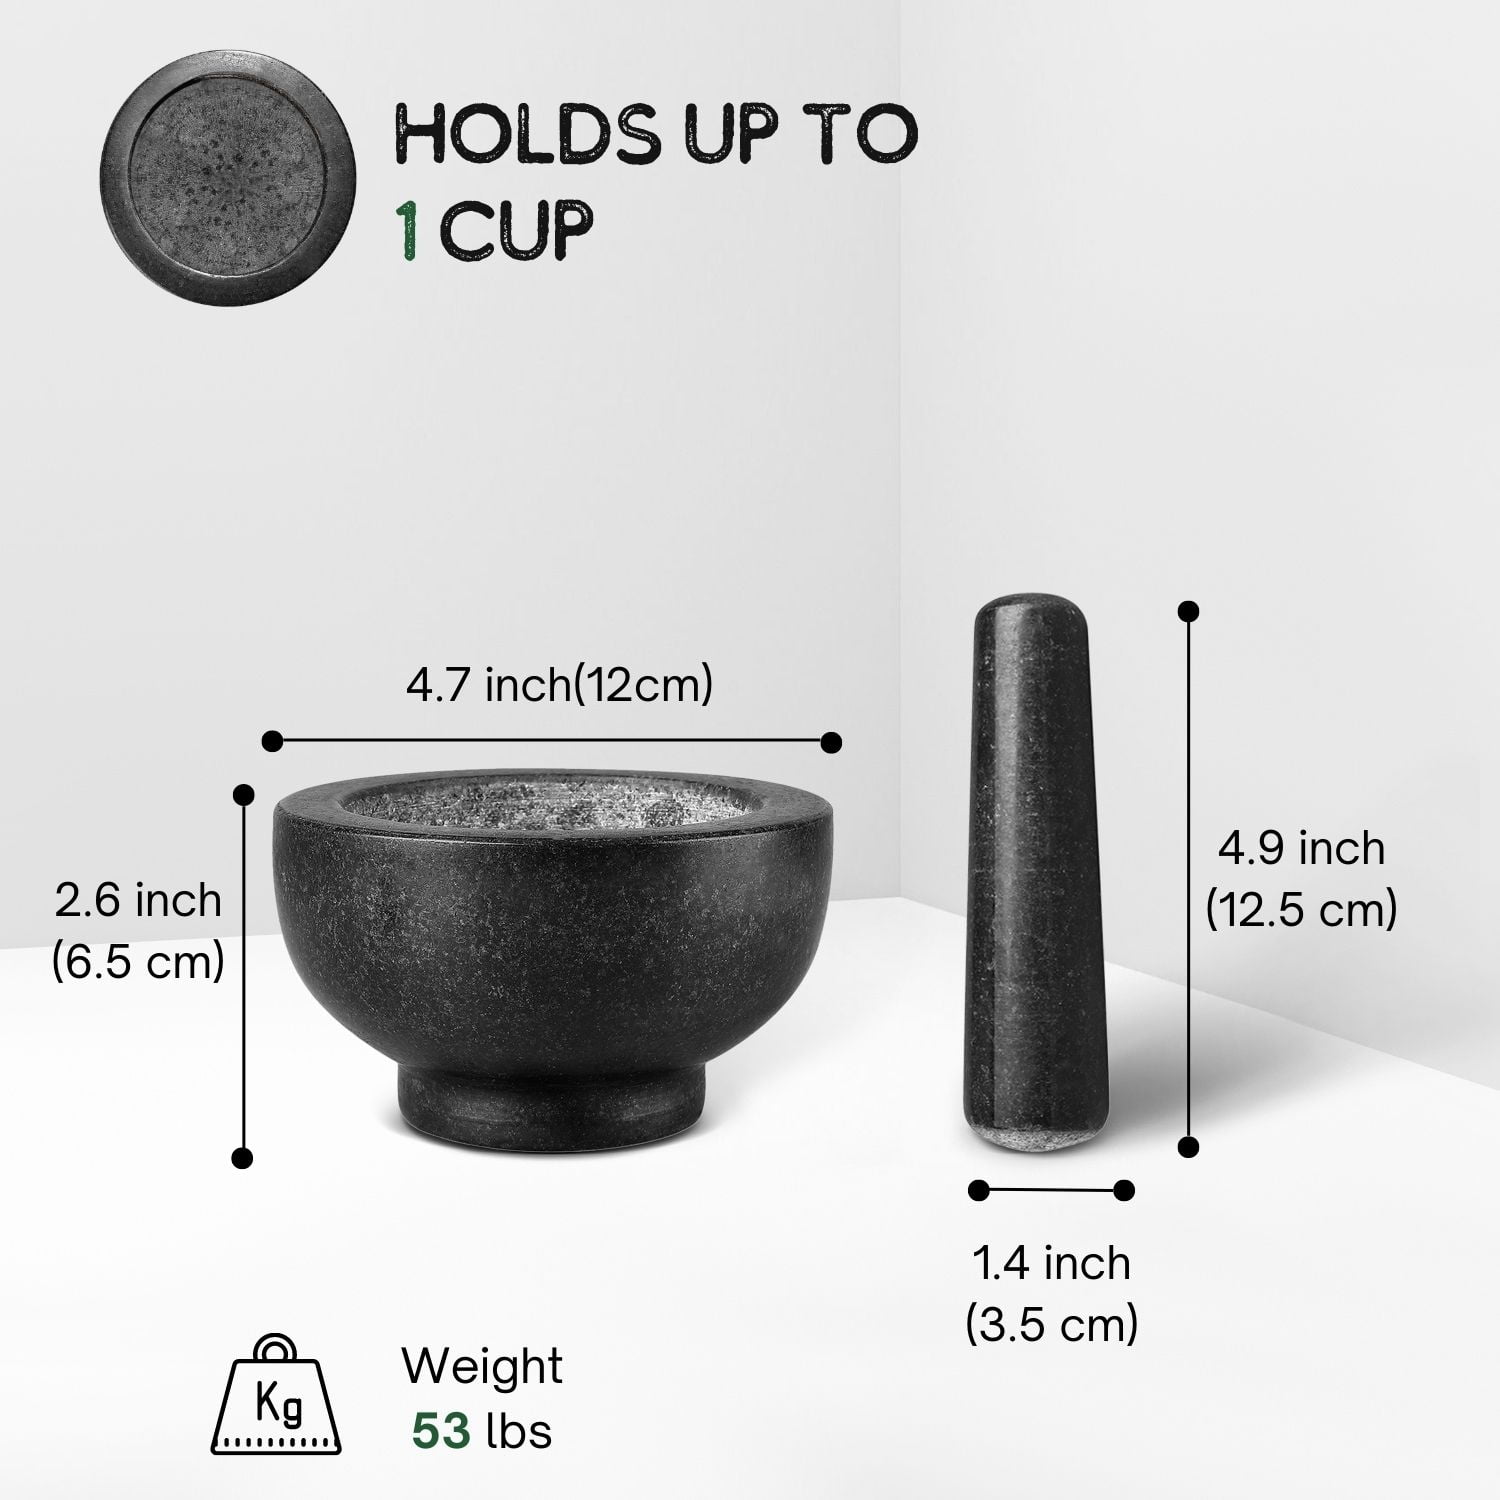 Laevo Granite Mortar and Pestle Set - 5.5 inch, 17 oz - Unique Double Sided - Pestle and Mortar Bowl Solid Stone Grinder - Guacamole Mortar and Pestle